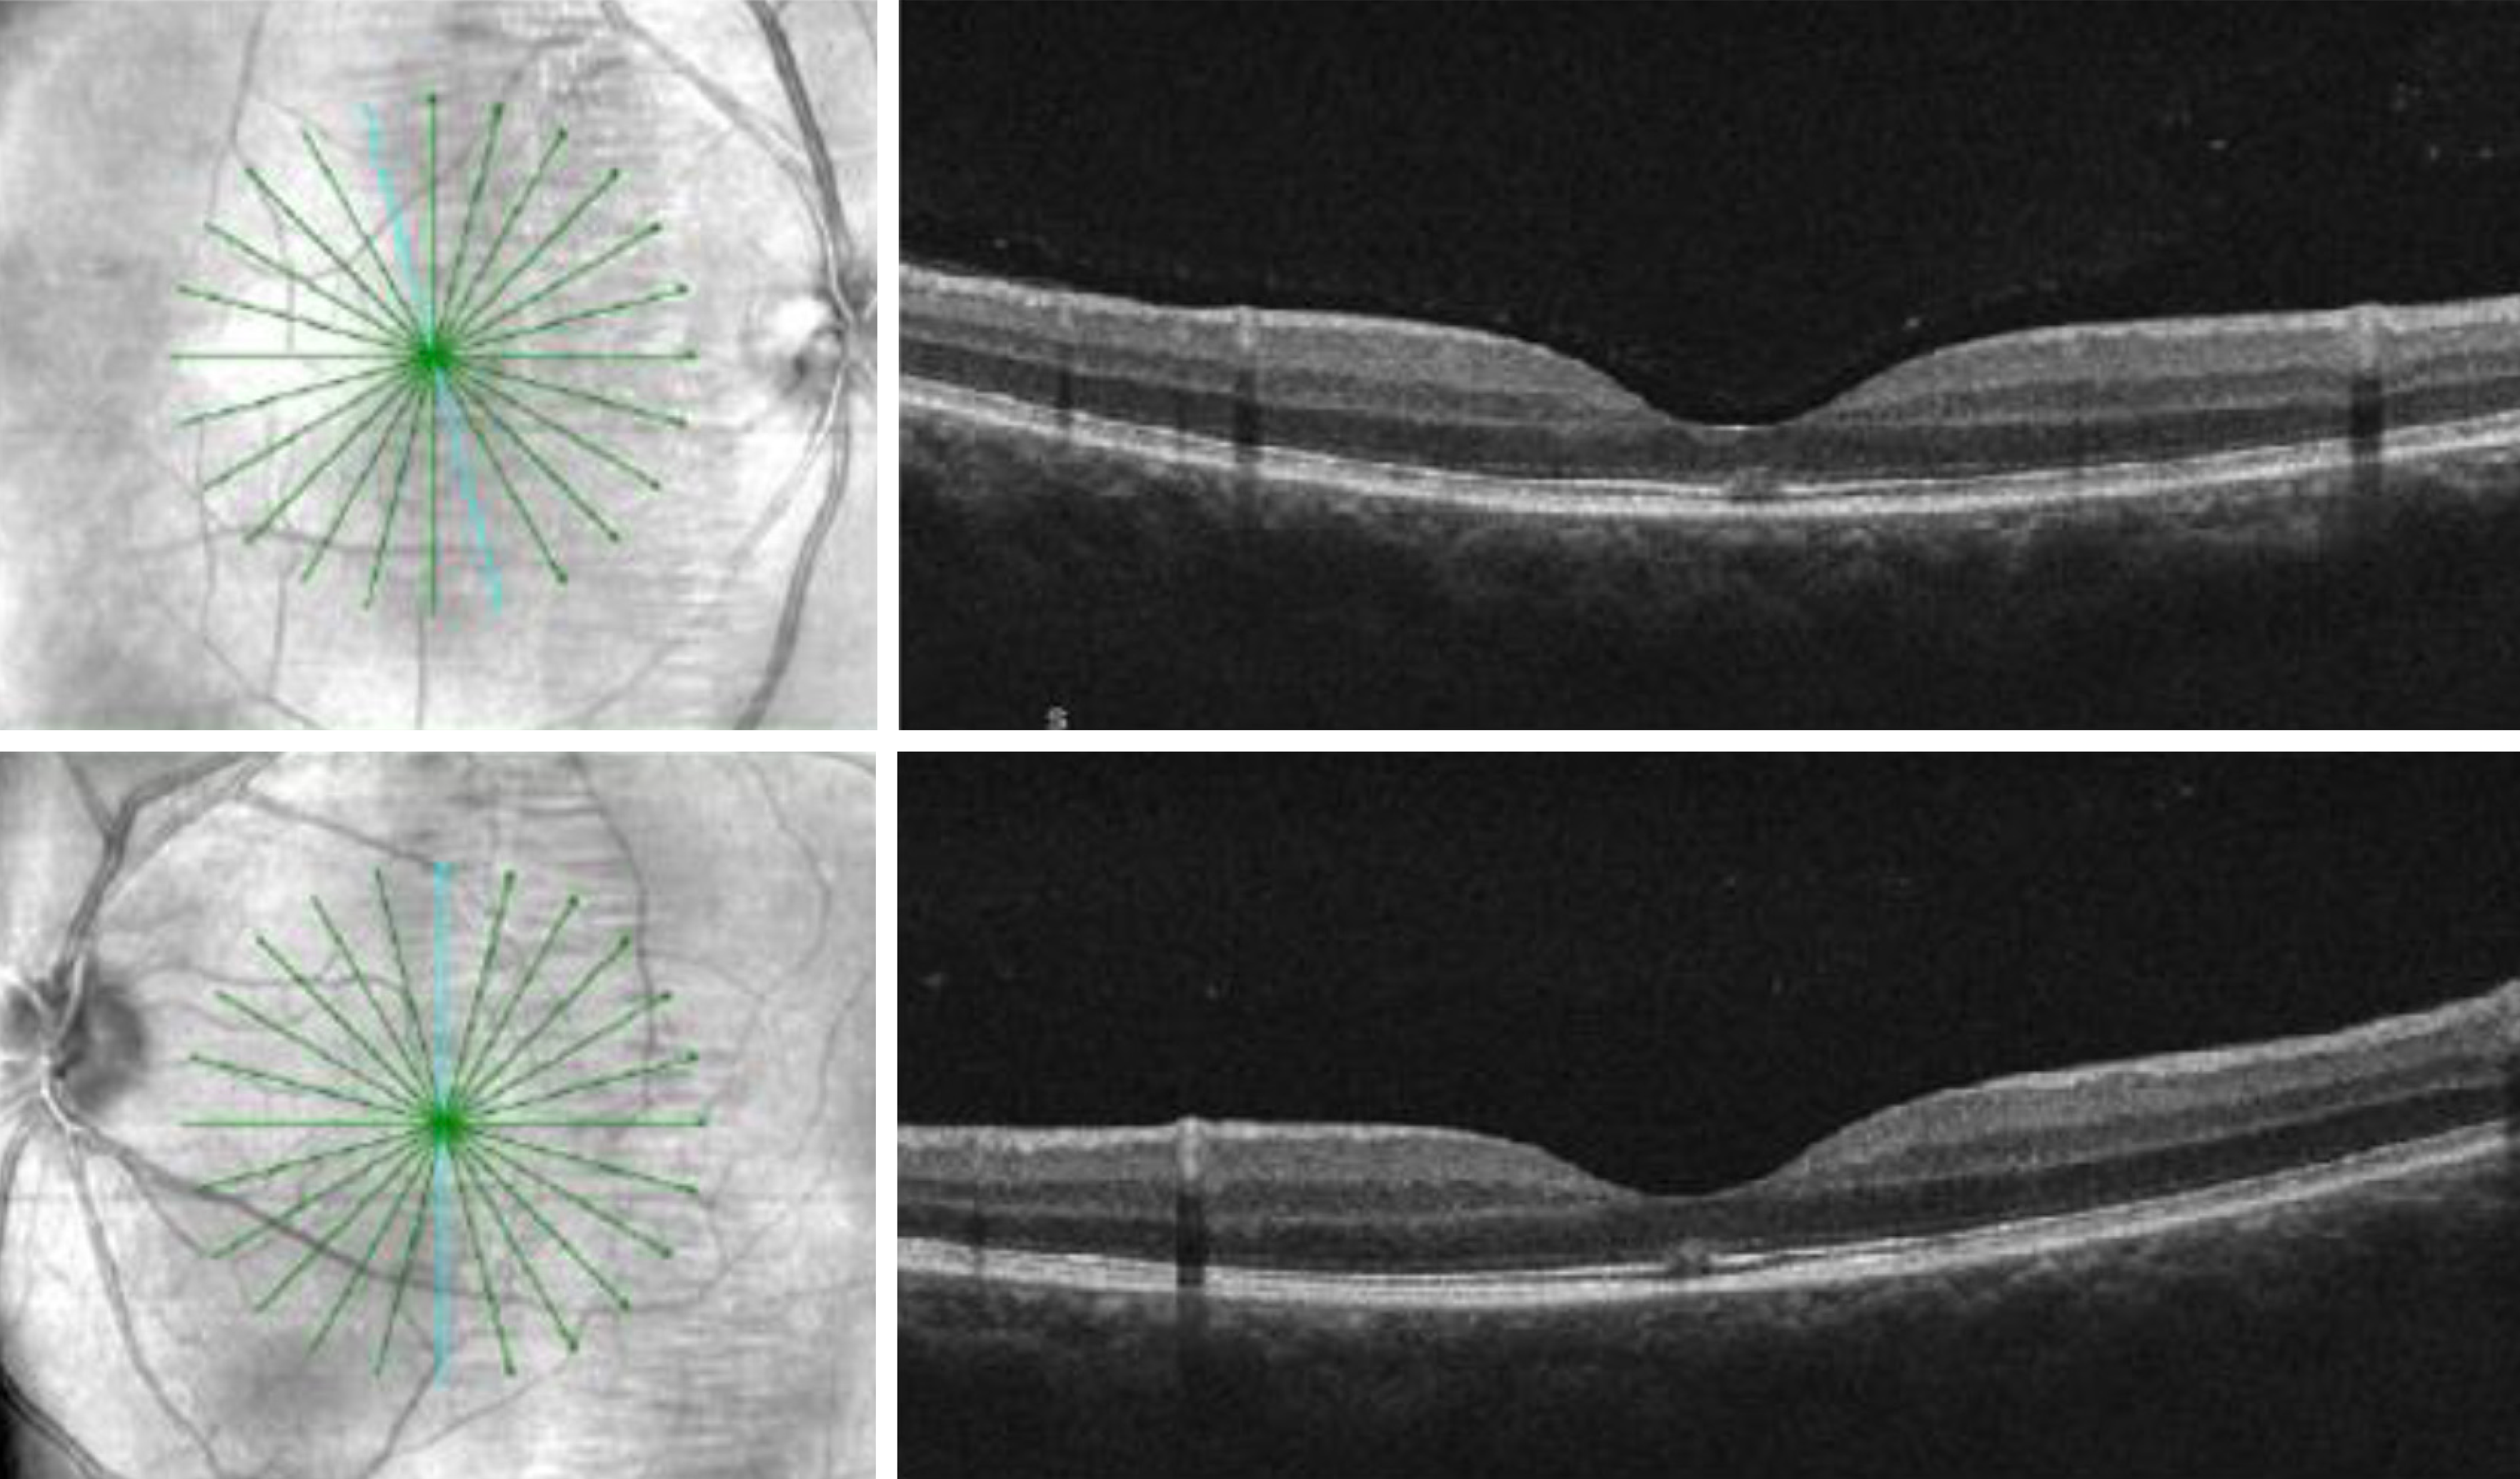 Radial SD-OCT of the bilateral maculae revealed focal disruption of the ellipsoid zone and interdigitation zone at the fovea.